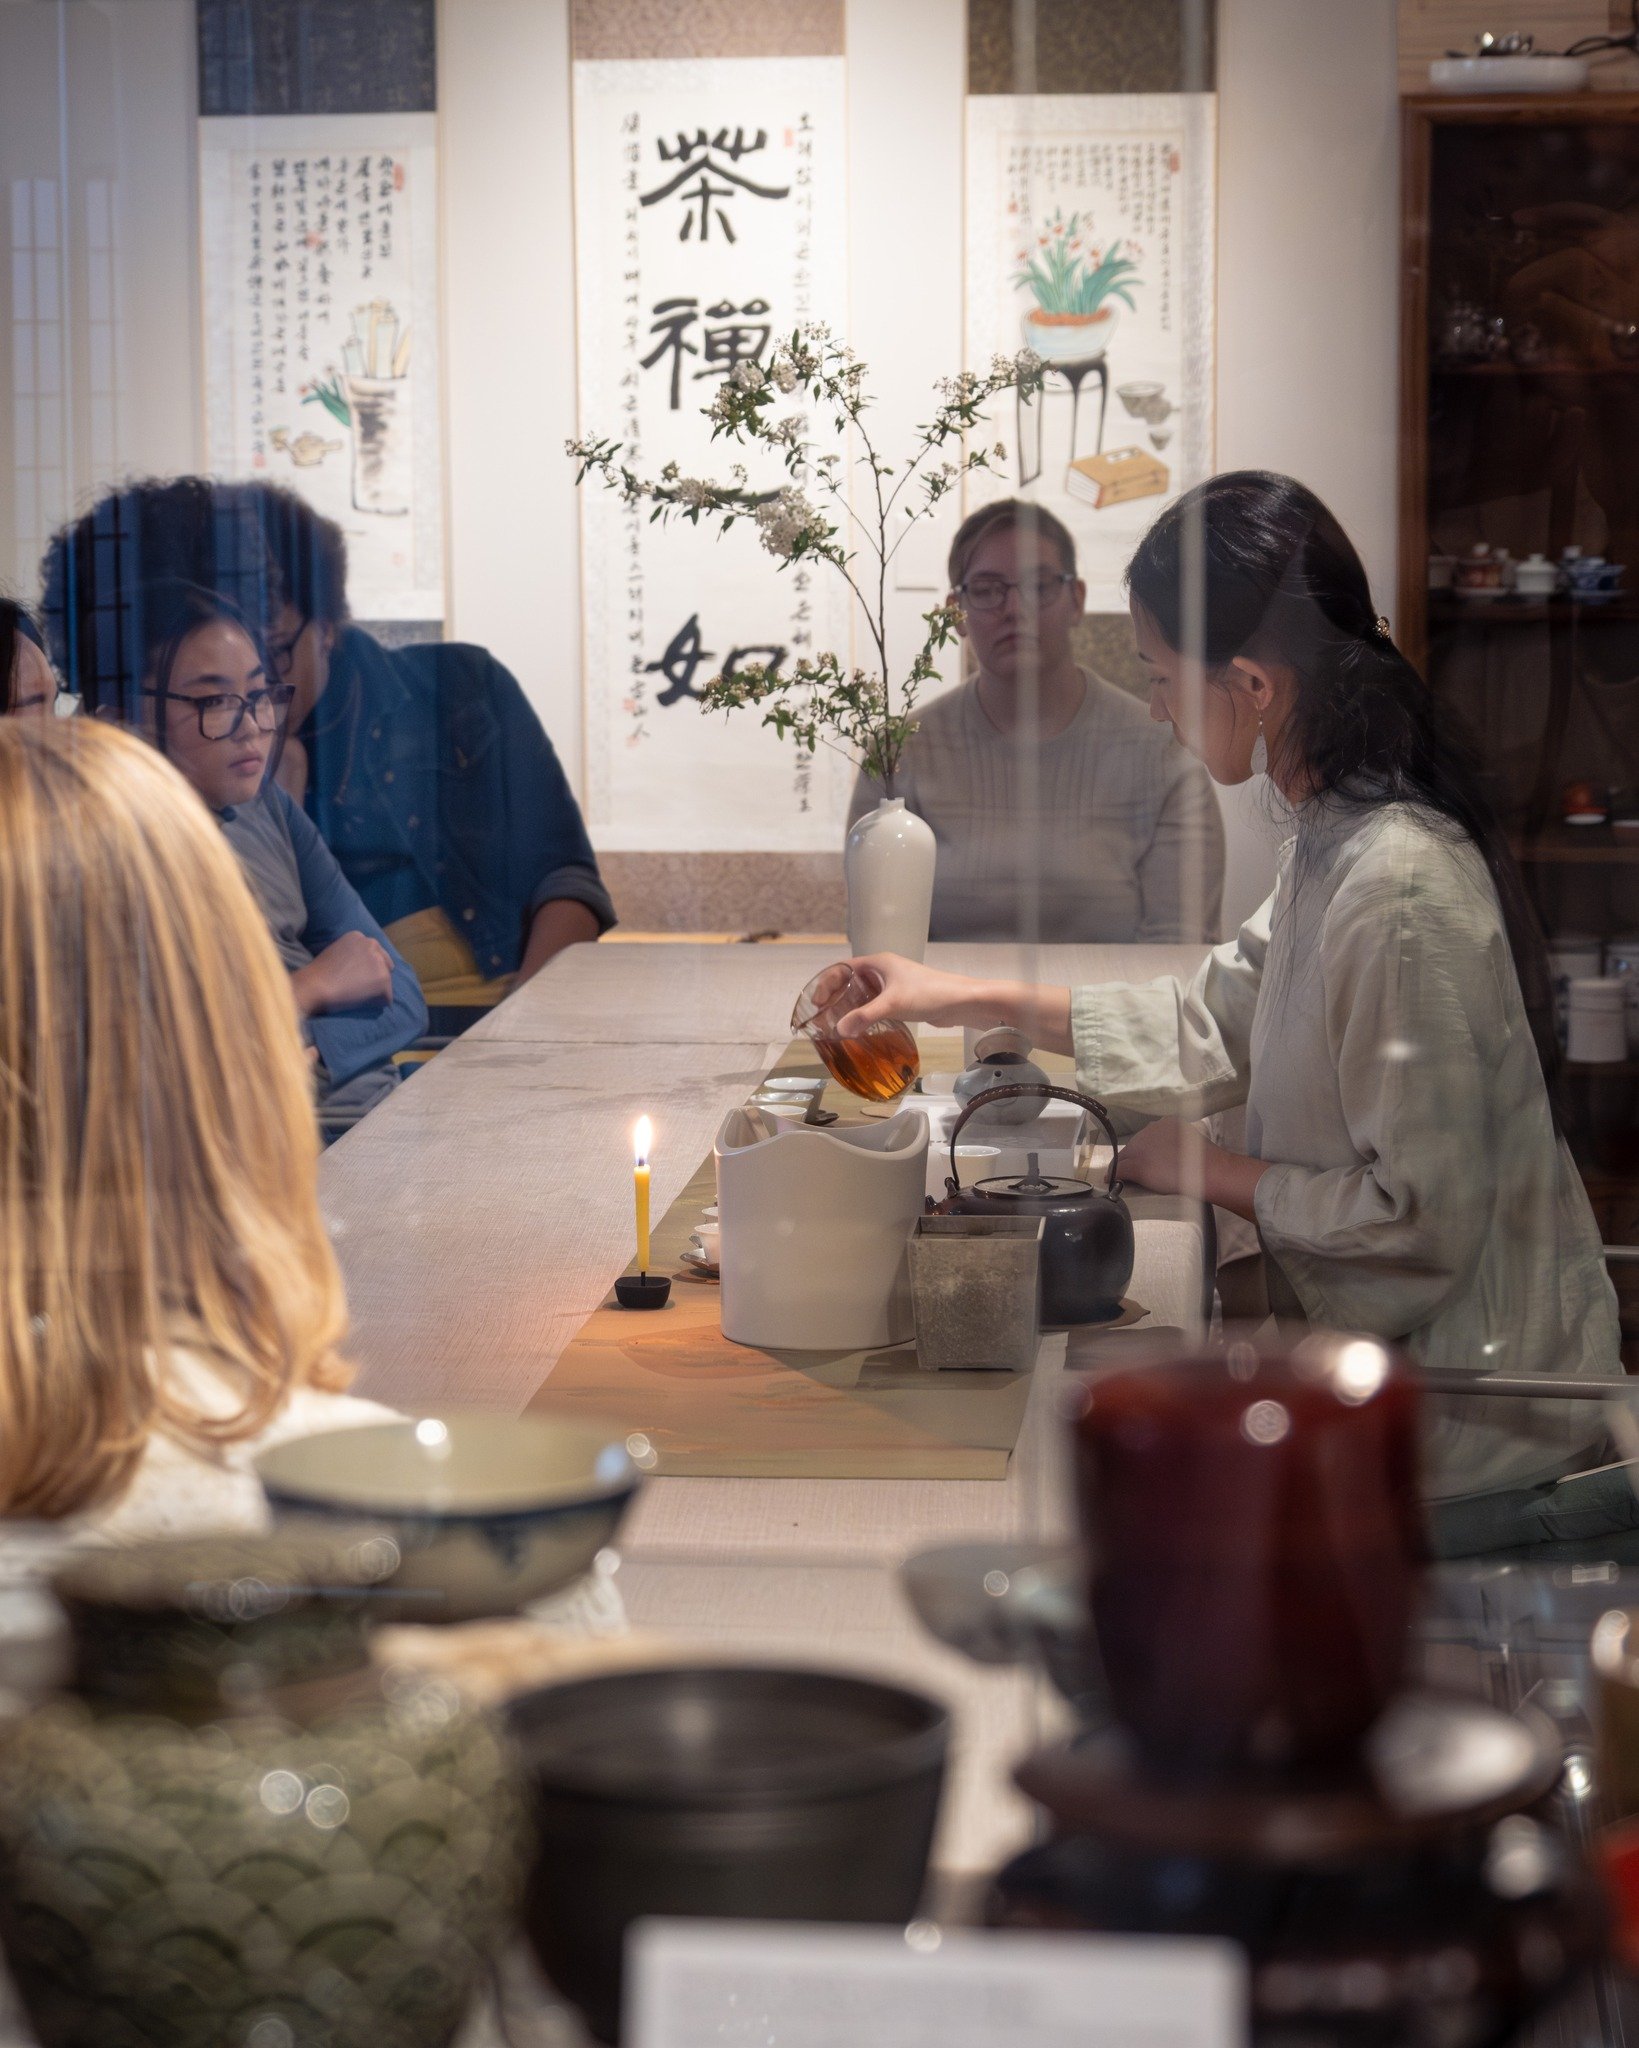 Penn State University has a particularly delightful tradition&mdash;for over a decade, their students have been operating three tea clubs and a tea house @pennstateteahouse, perpetuating Chinese gongfu tea, Japanese tea ceremony, and Korean tea ritua